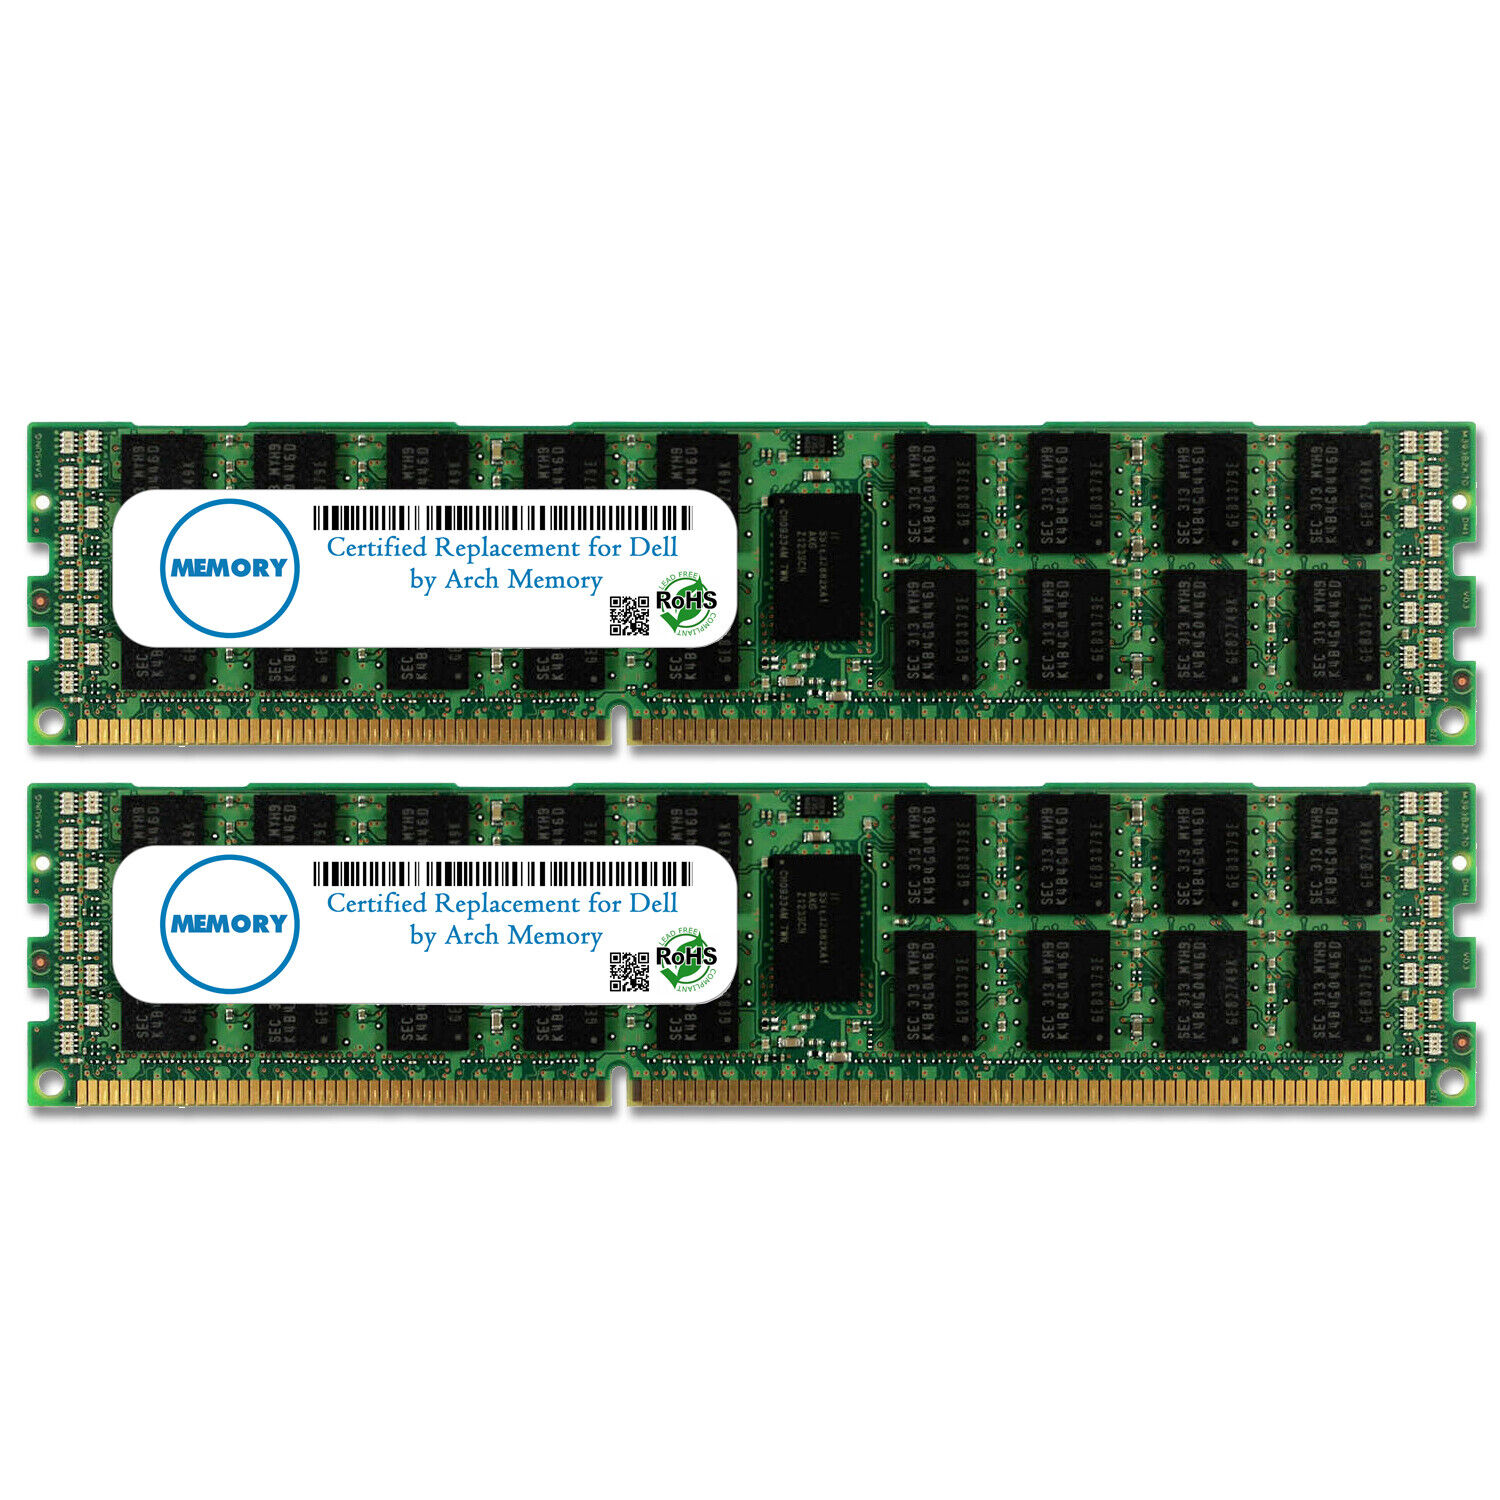 16GB (2 x 8GB) SNPP9RN2C/8G A6996808 DDR3L ECC RDIMM Server RAM Memory for Dell